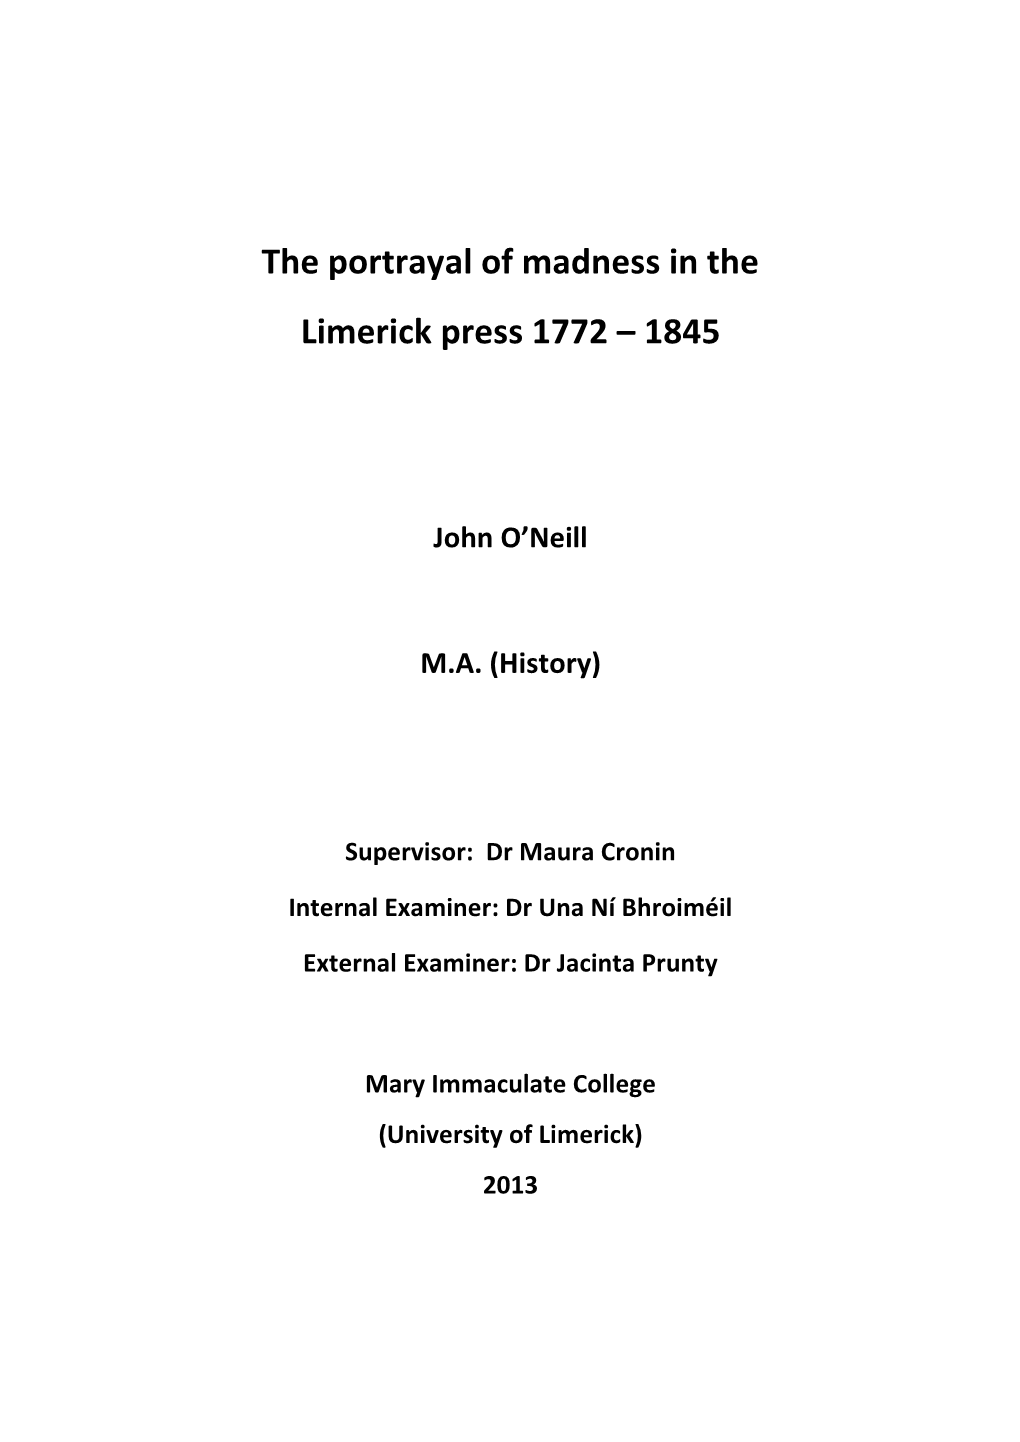 The Portrayal of Madness in the Limerick Press 1772 – 1845